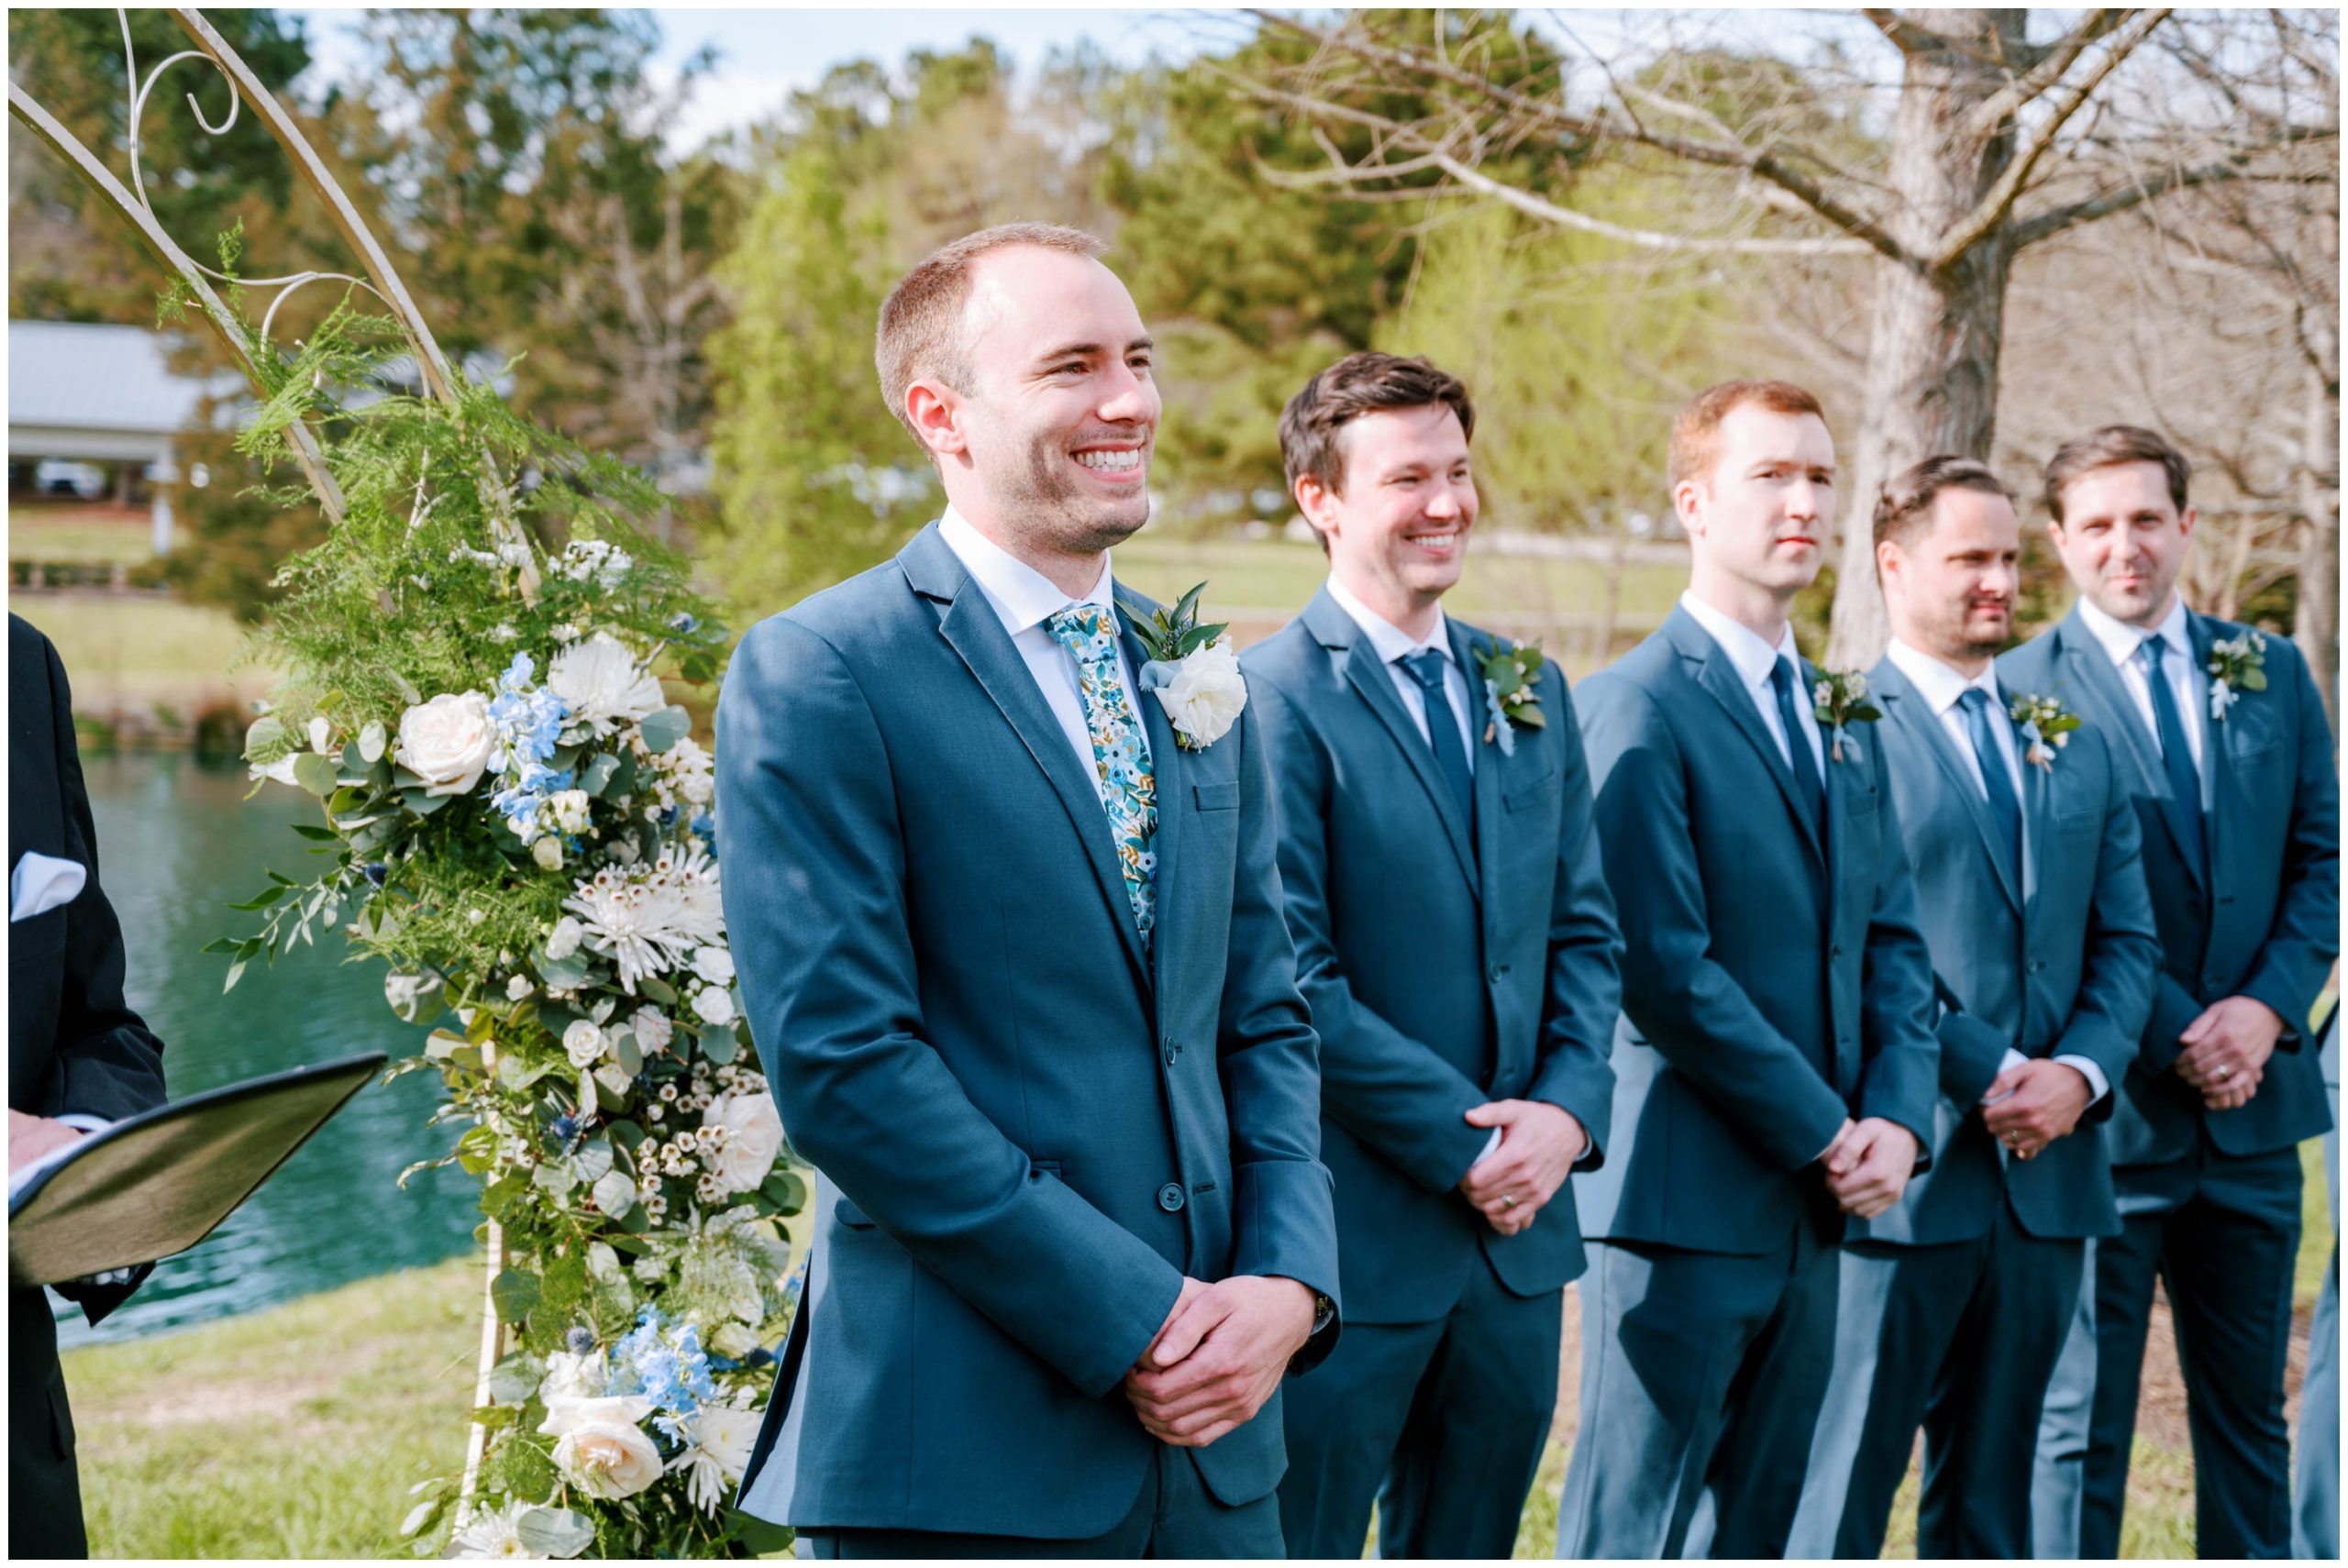 Groom in a dark blue suit with a floral necktie for a spring wedding